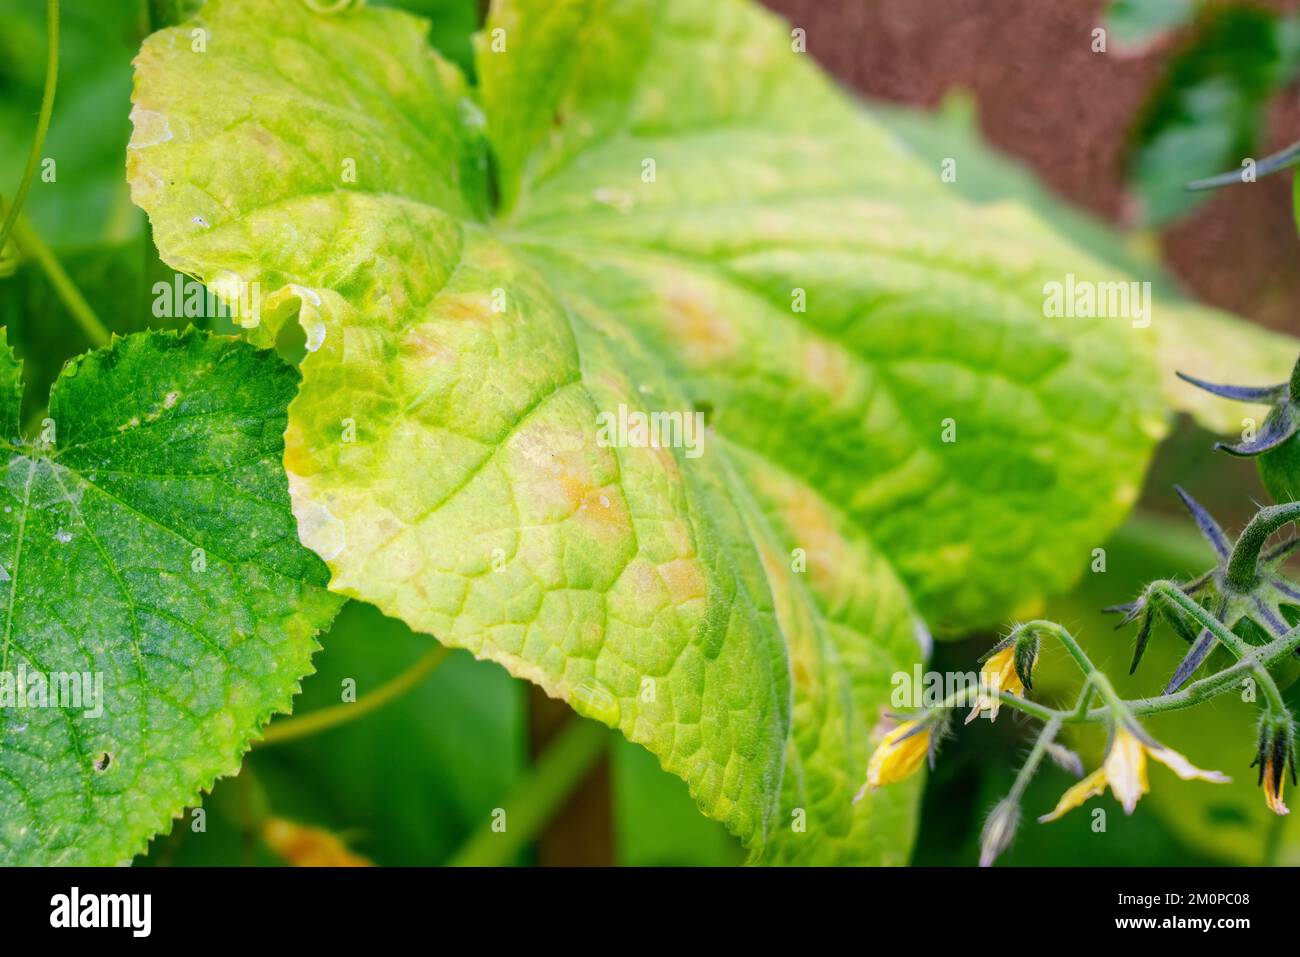 Fresh young tomato and cucumber green leaf affected by disease.Fungal or viral disease. Lack or excess of moisture and nutrients, close up photo Stock Photo